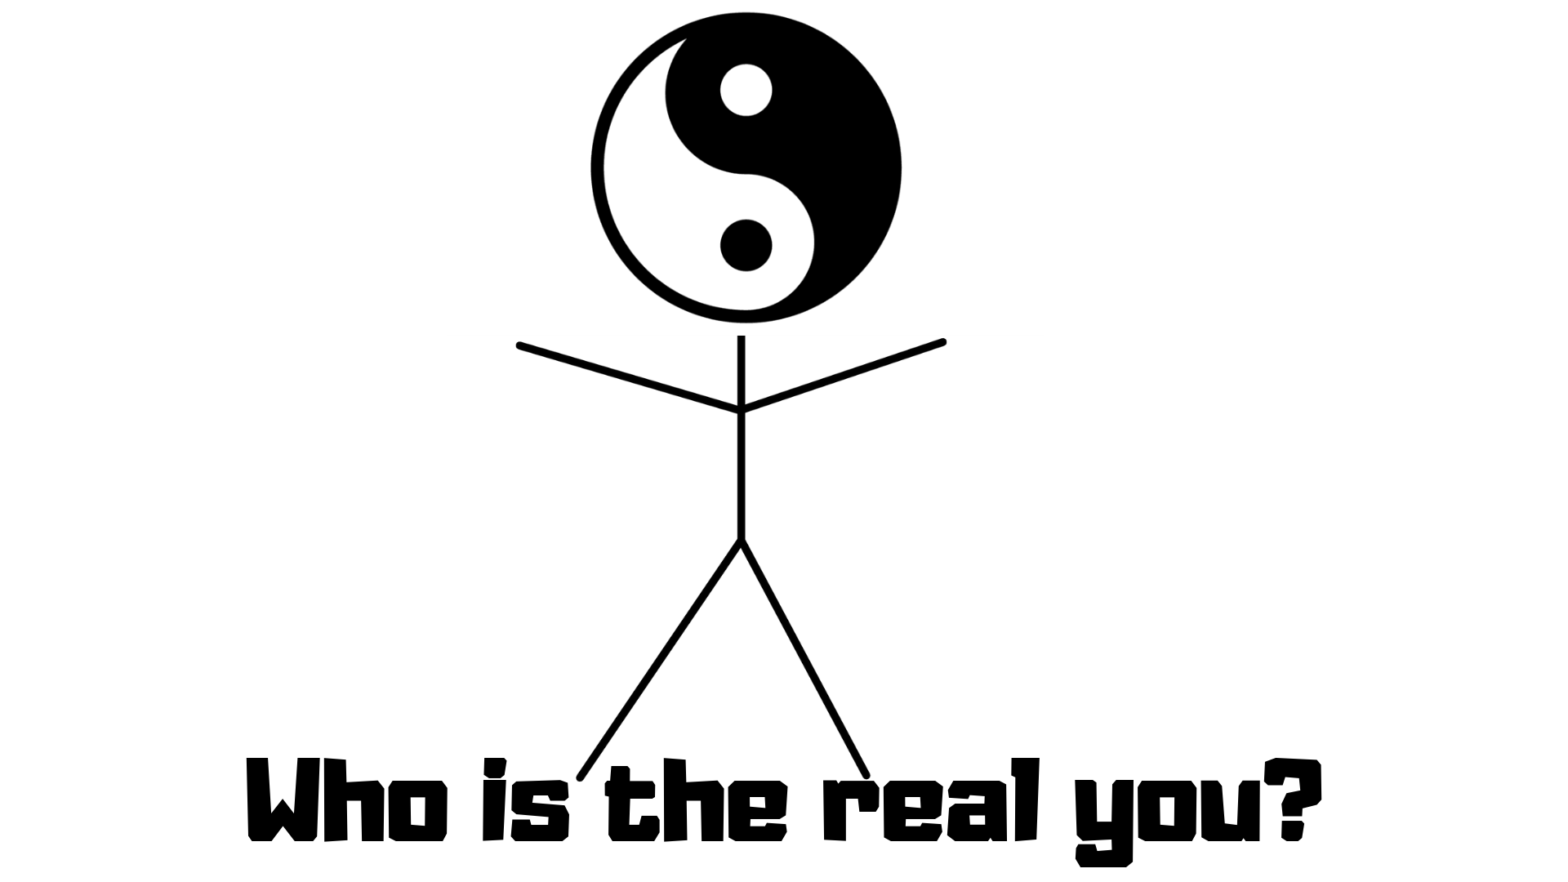 Who is the real you?